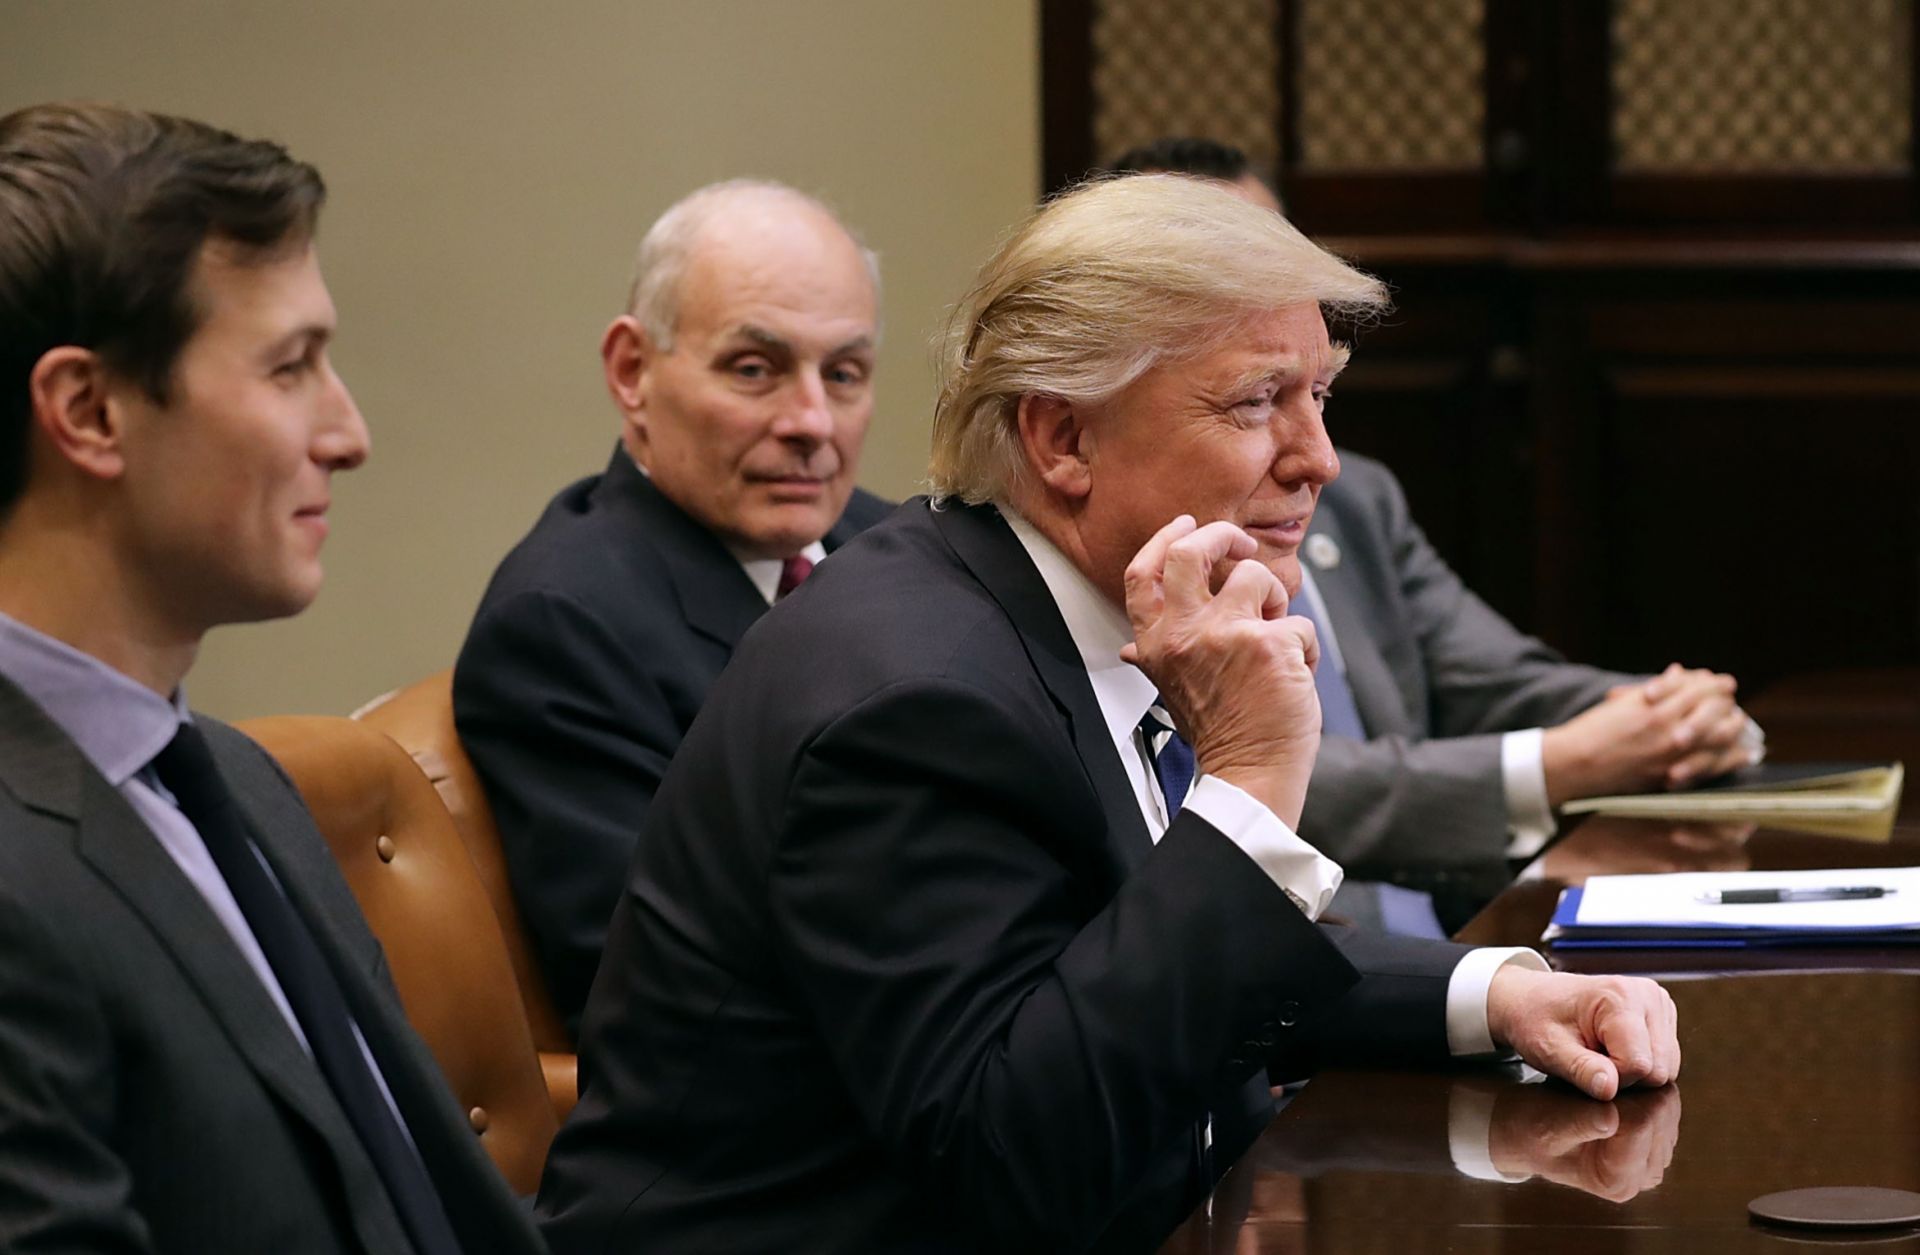 U.S. President Donald Trump speaks during a Jan. 31, 2017, White House meeting with cybersecurity experts.